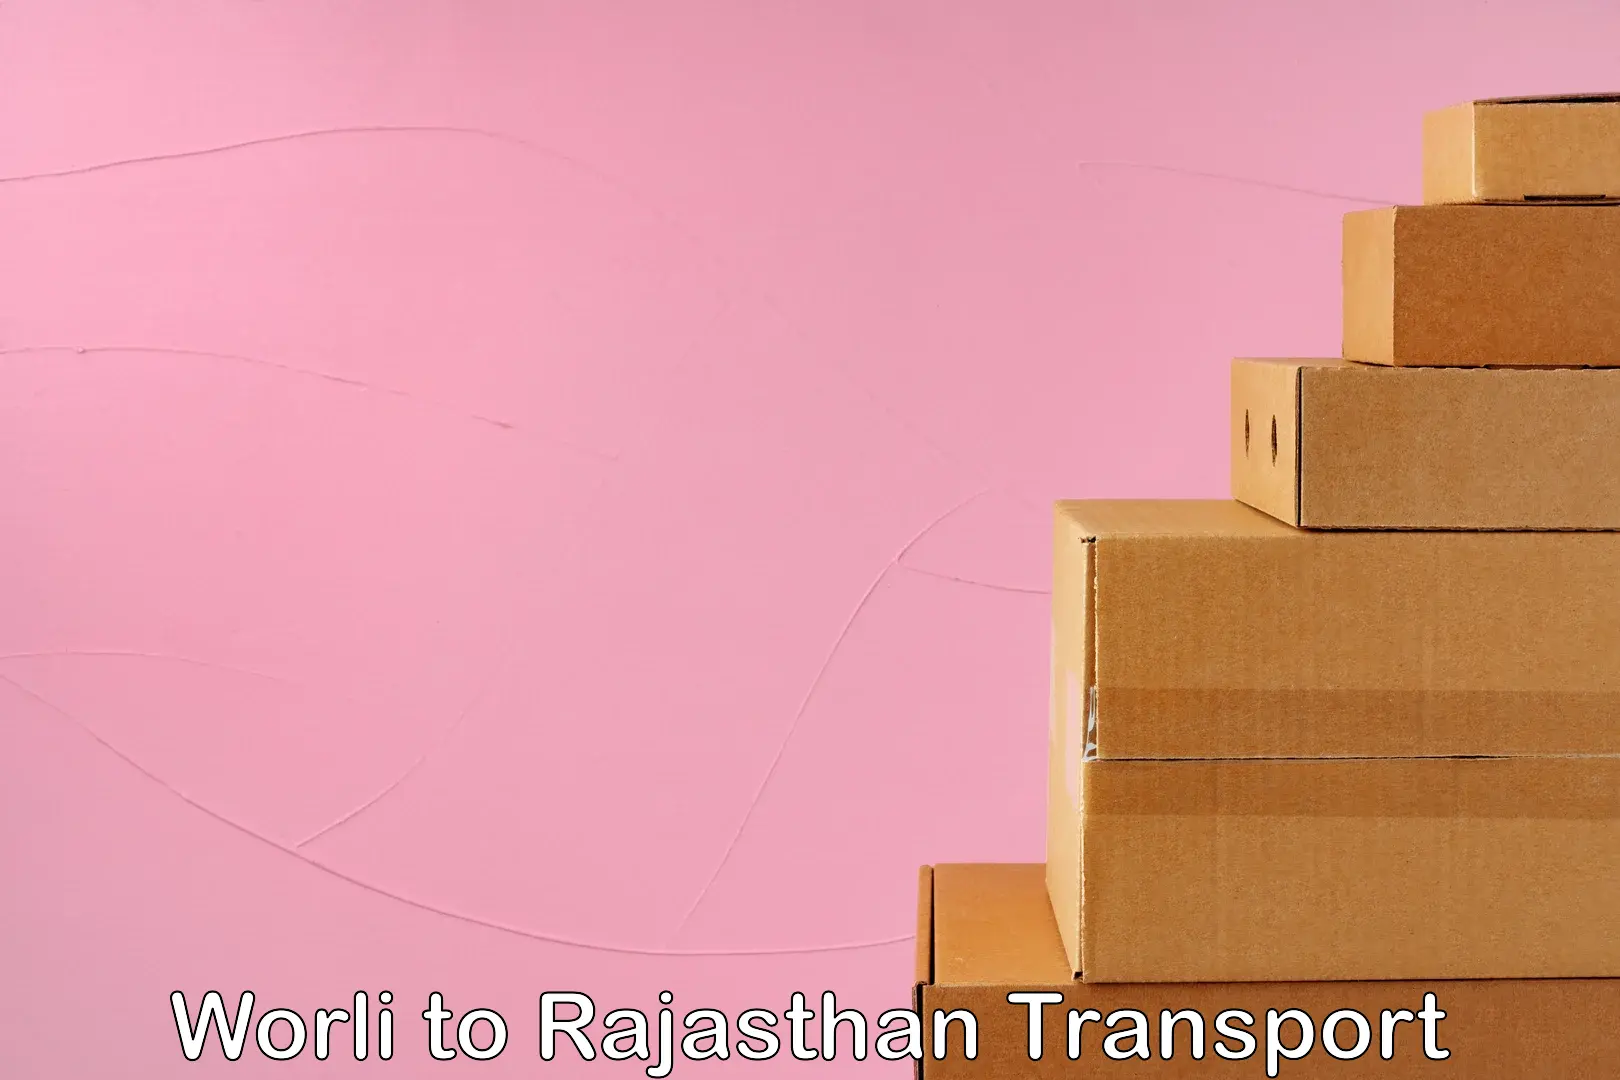 Domestic goods transportation services Worli to Rajasthan